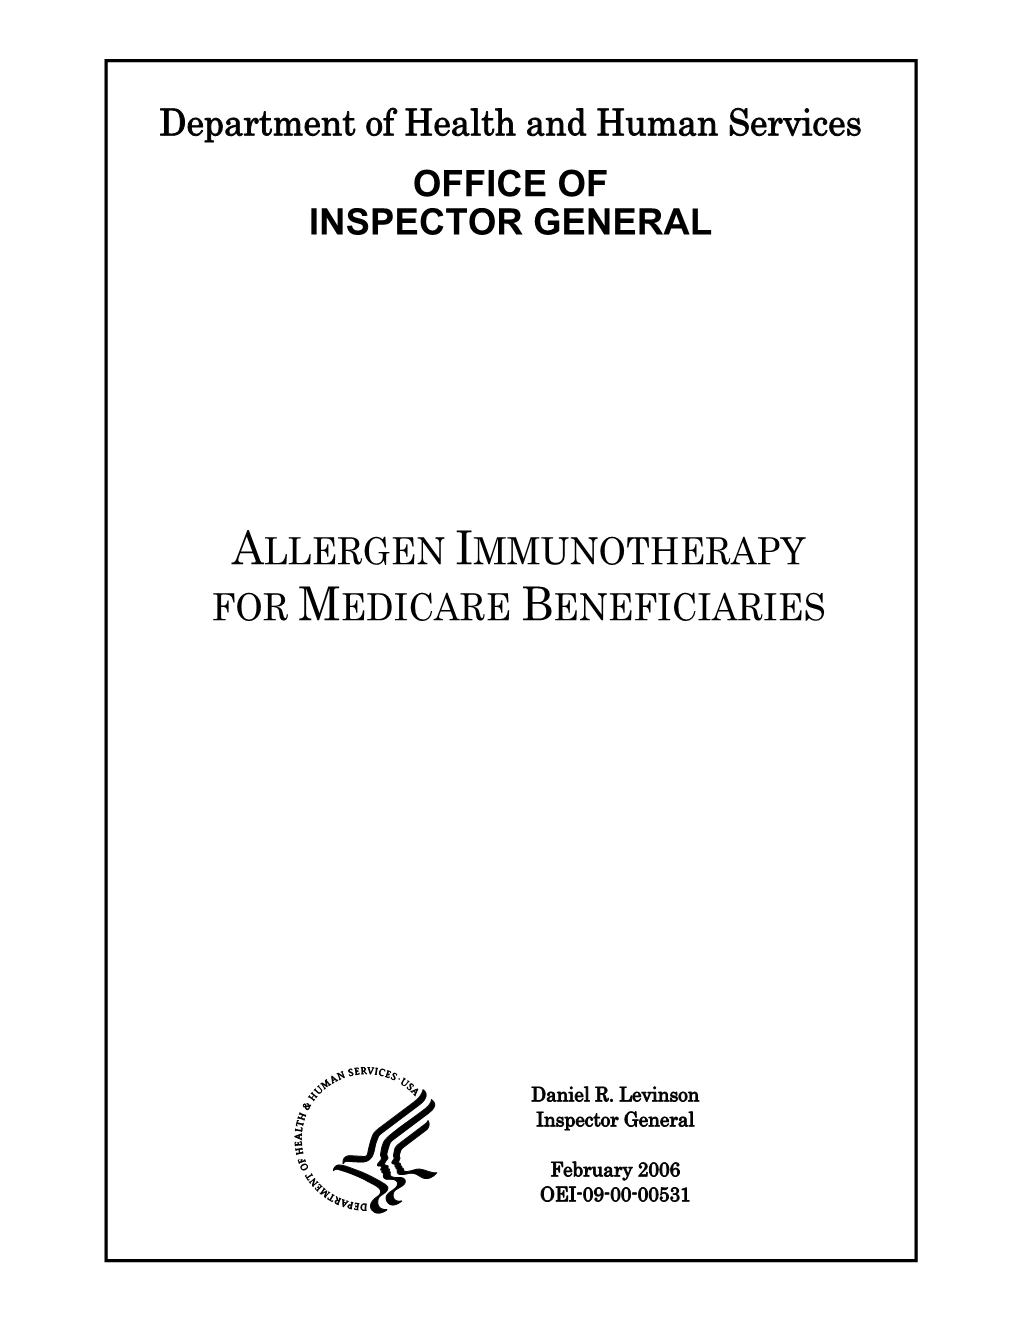 Allergen Immunotherapy for Medicare Beneficiaries